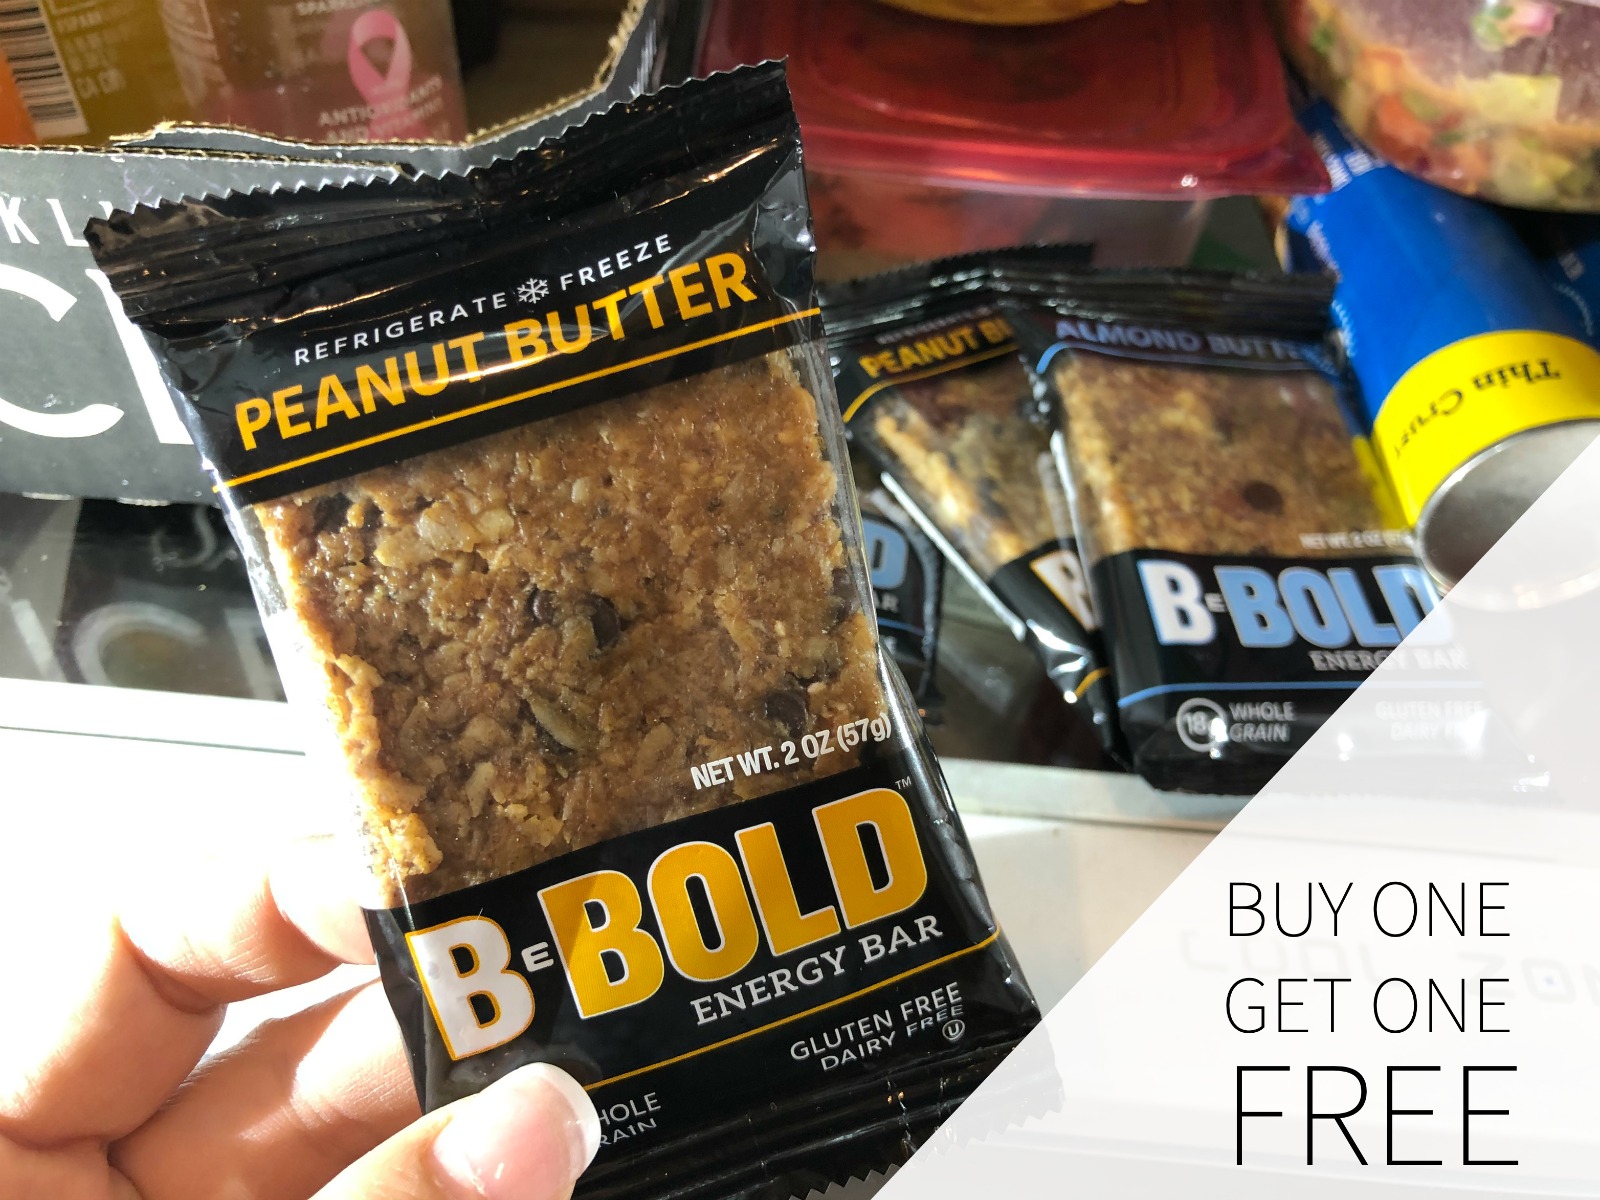 BeBOLD Bars From The Founder Of Stacy’s Pita Chips Are BOGO This Week At Publix! on I Heart Publix 1